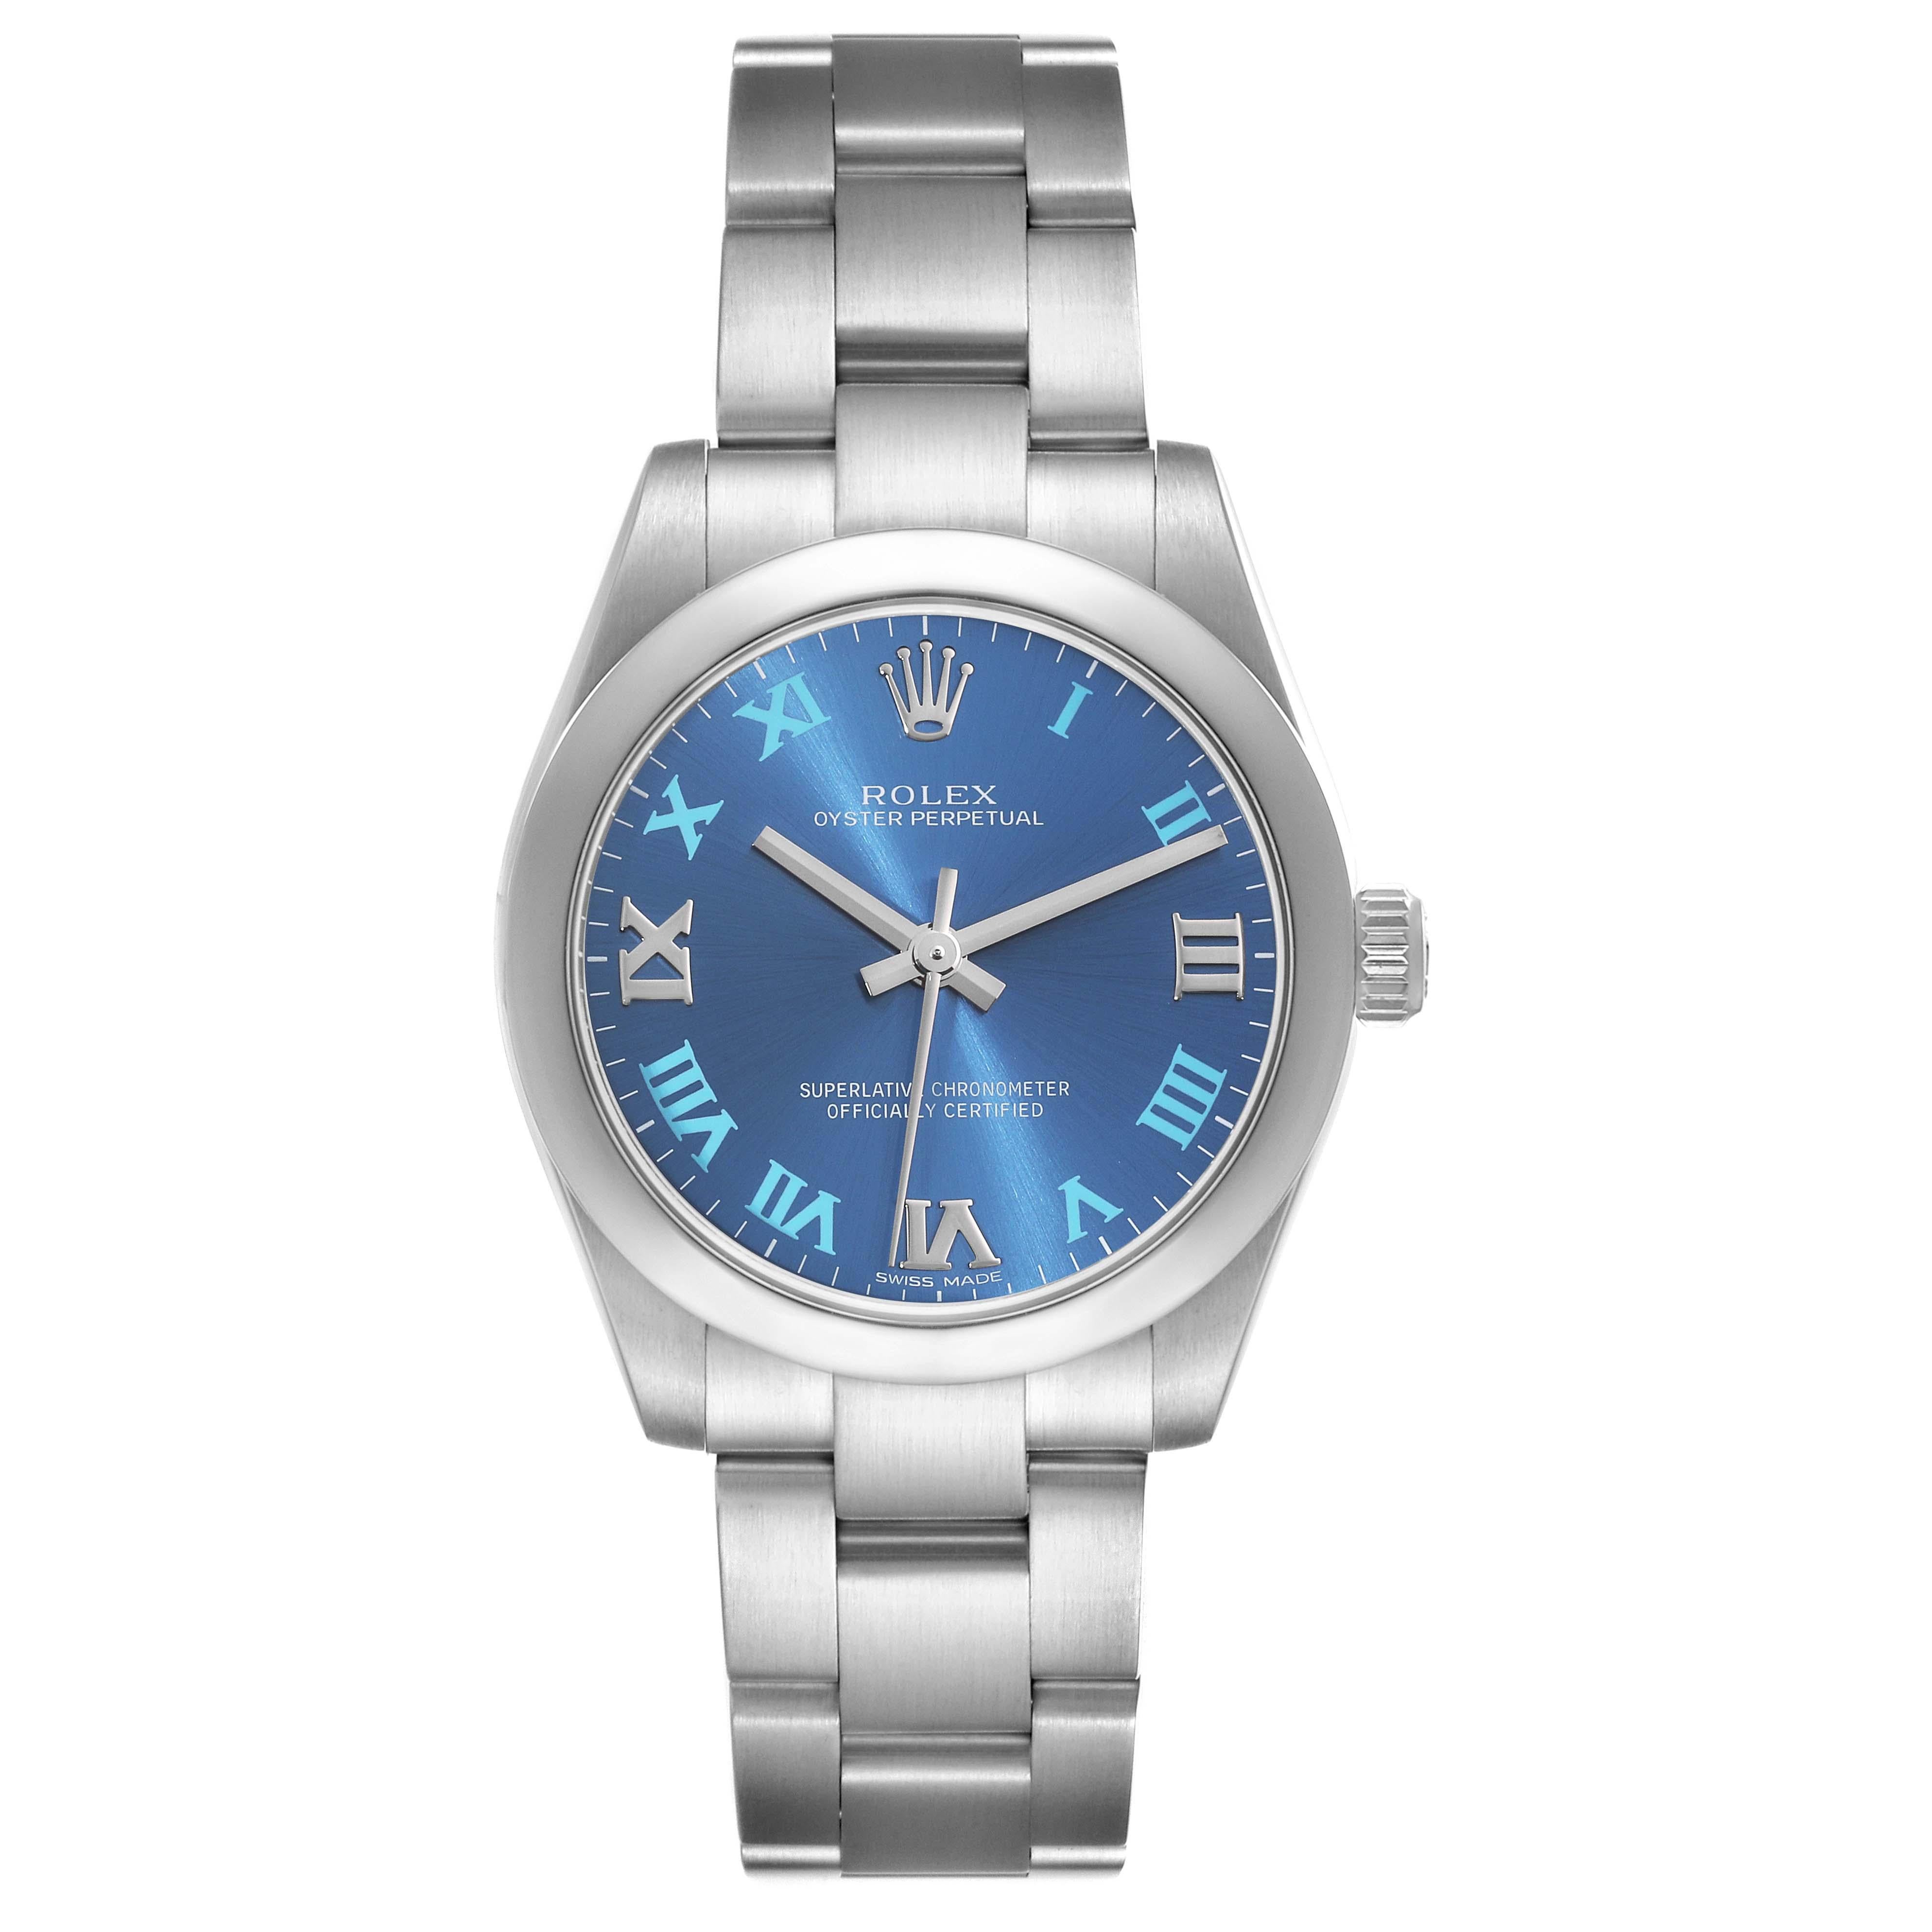 Rolex Oyster Perpetual Midsize 31 Blue Dial Steel Ladies Watch 177200. Officially certified chronometer automatic self-winding movement. Stainless steel oyster case 31.0 mm in diameter. Rolex logo on the crown. Stainless steel smooth domed bezel.